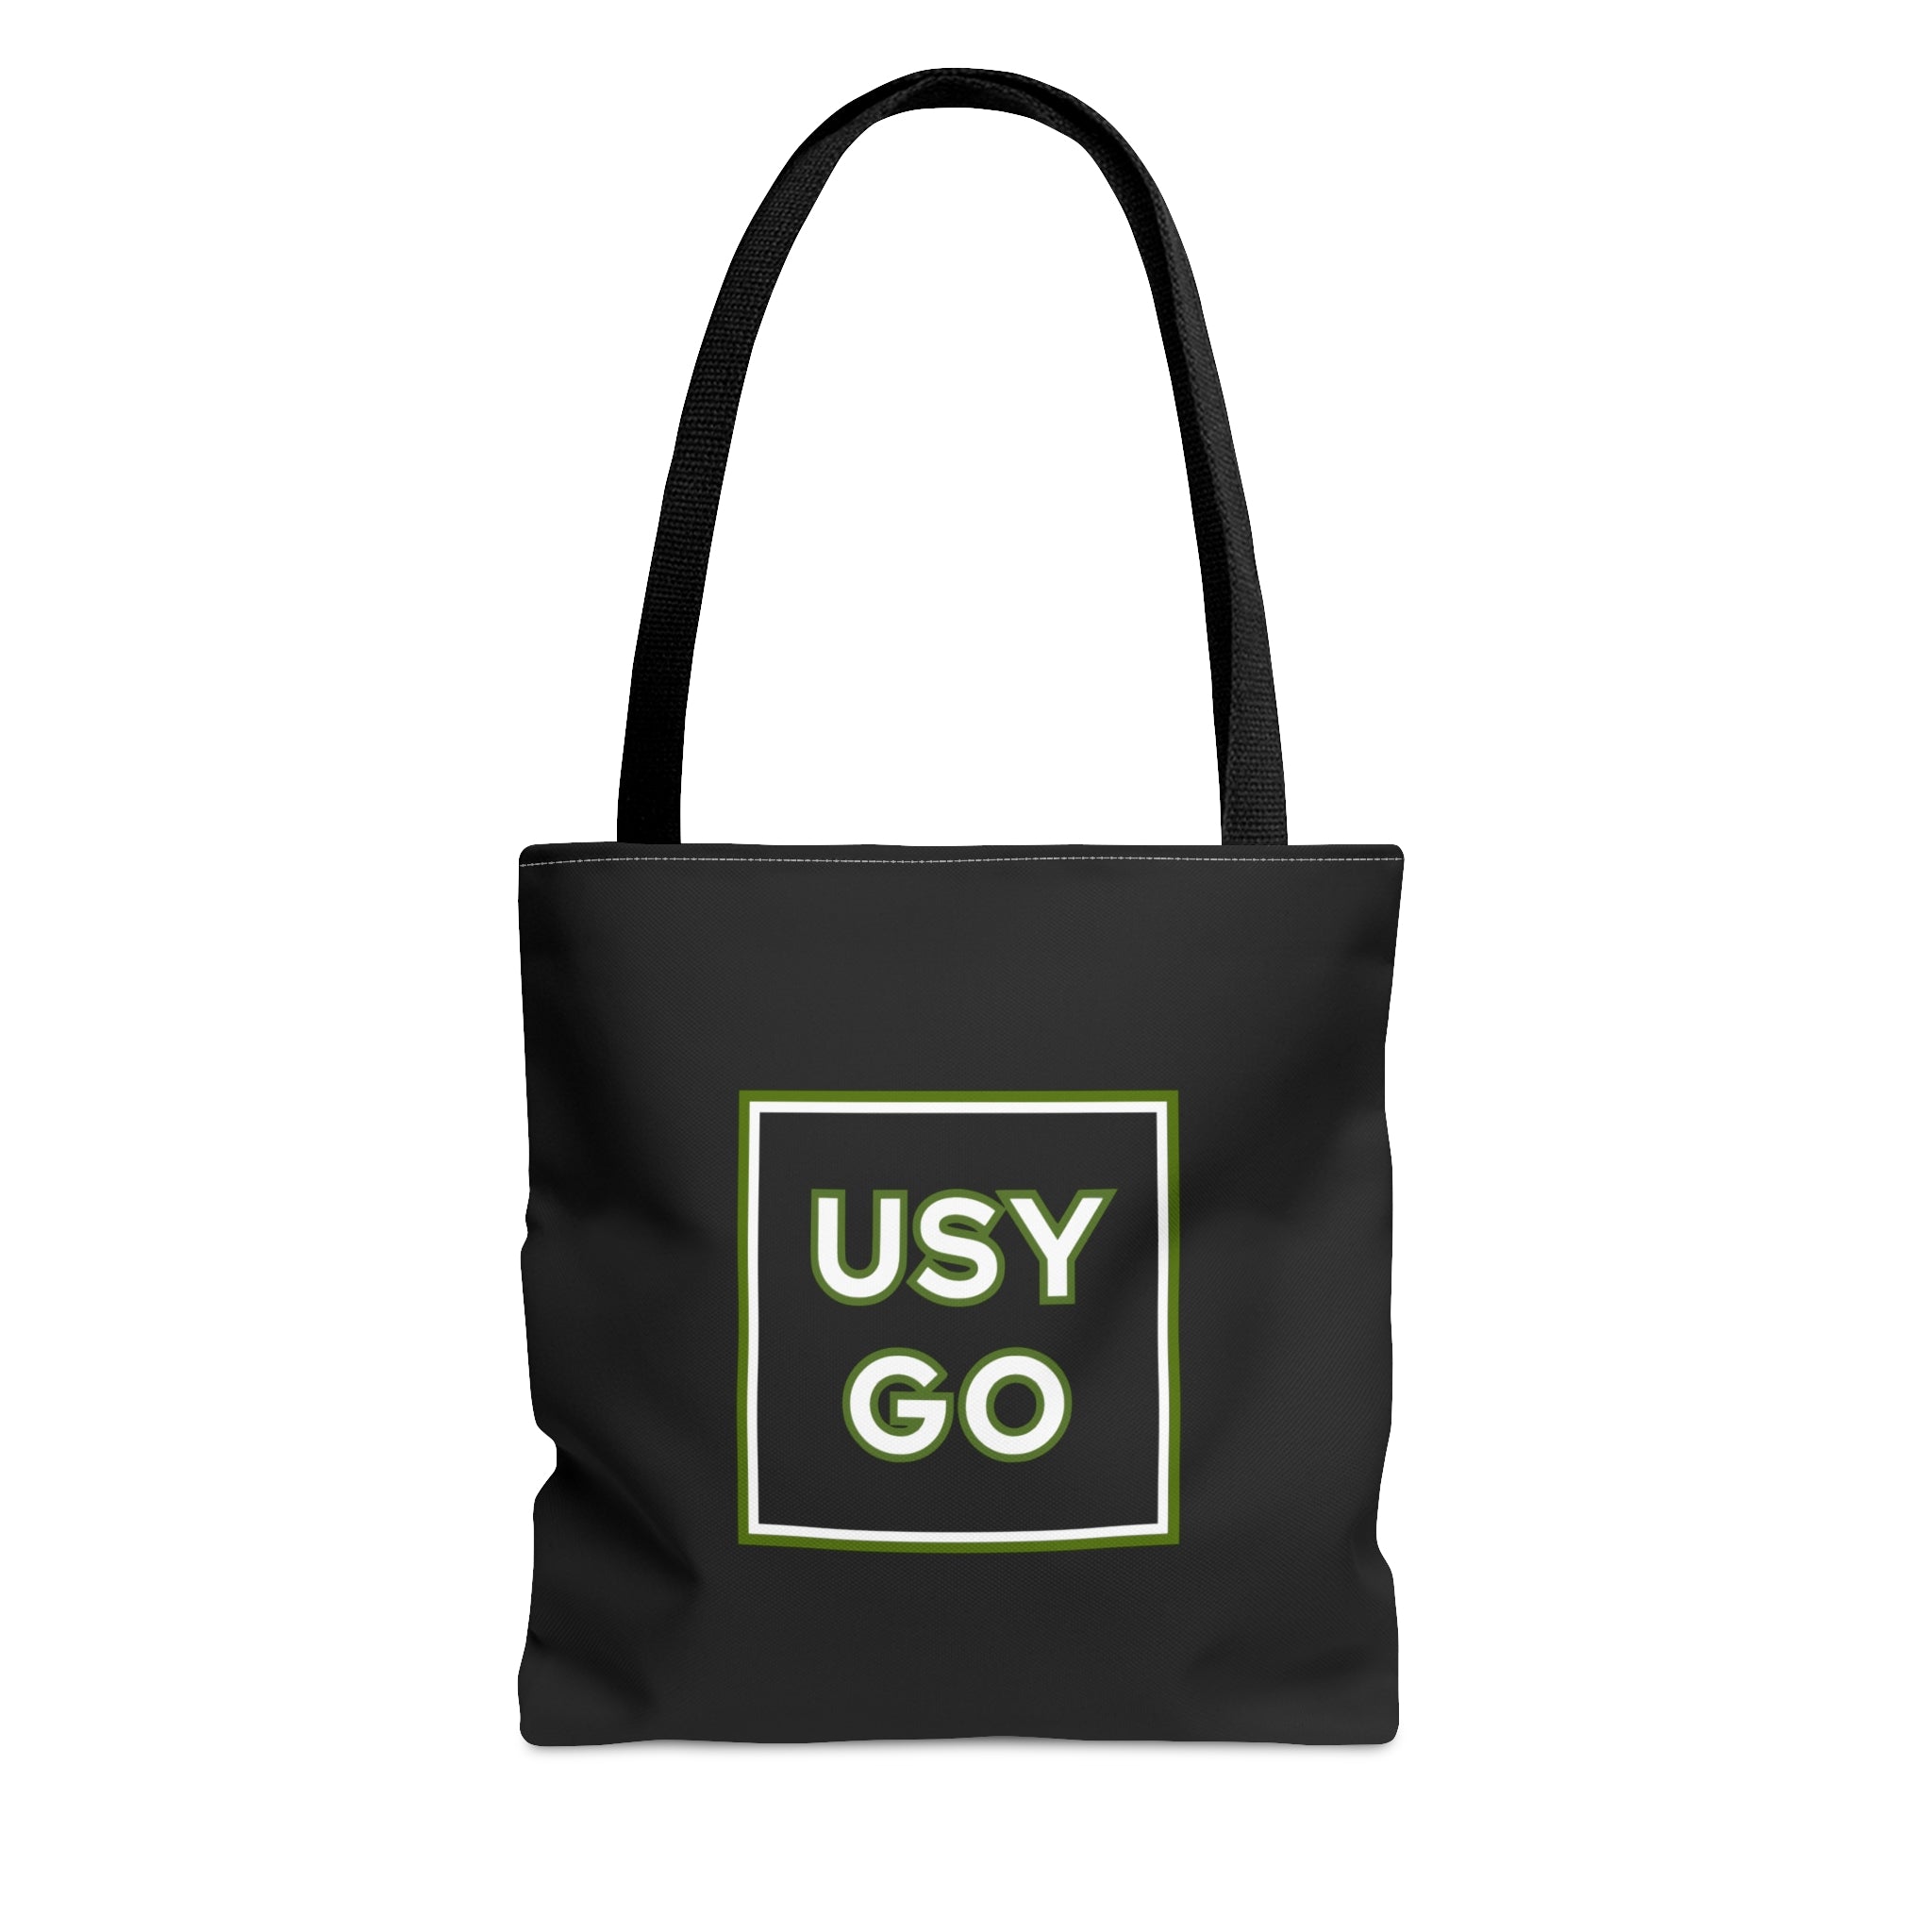 Black USYGO Tote Bags in 3 Sizes